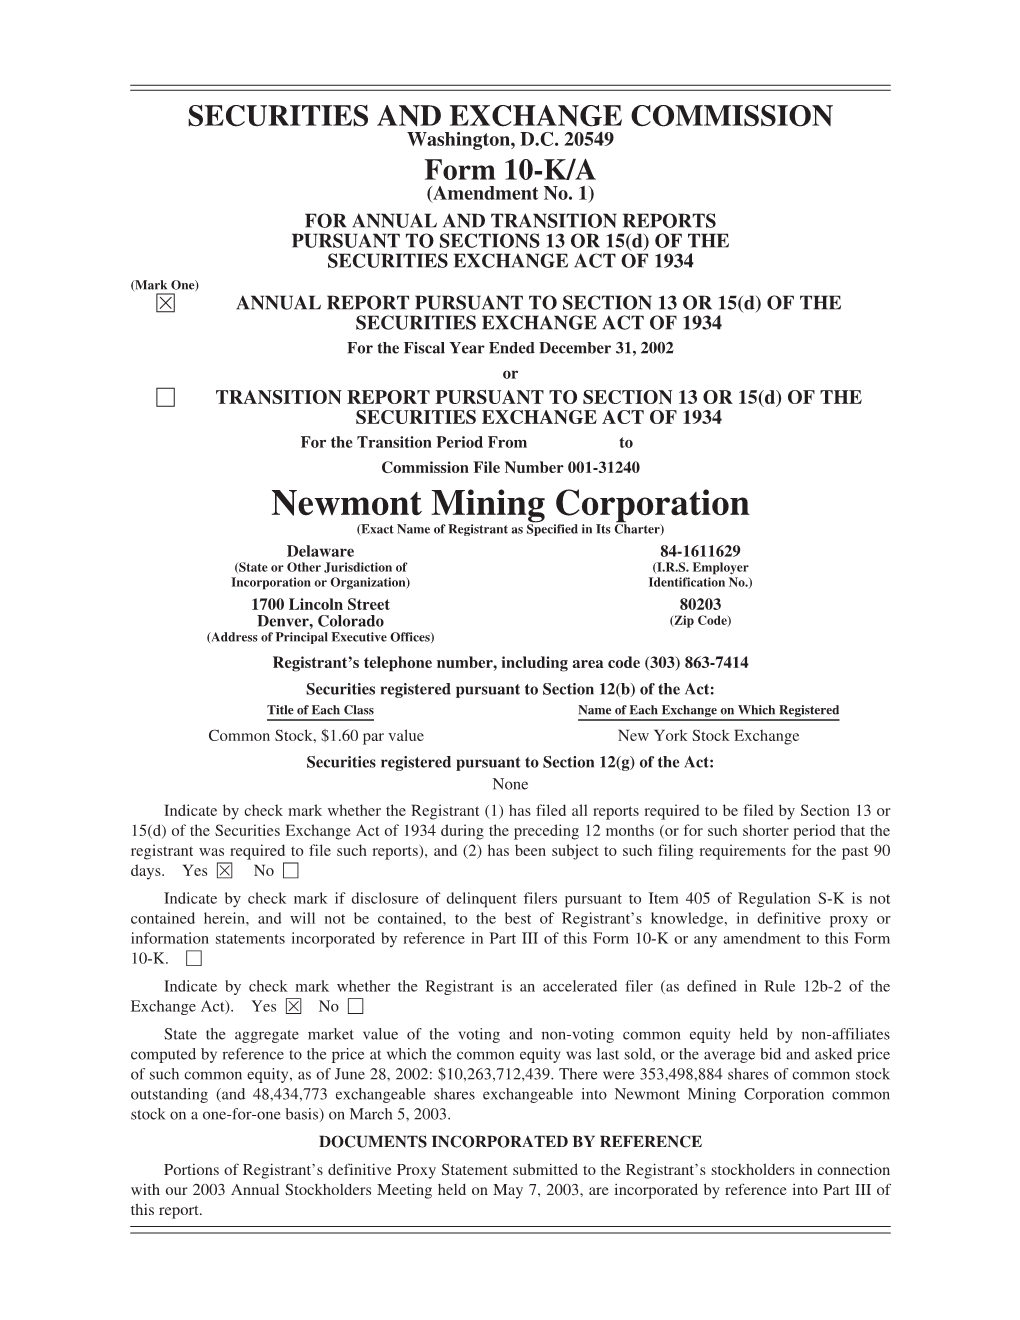 Newmont Mining Corporation (Exact Name of Registrant As Specified in Its Charter) Delaware 84-1611629 (State Or Other Jurisdiction of (I.R.S